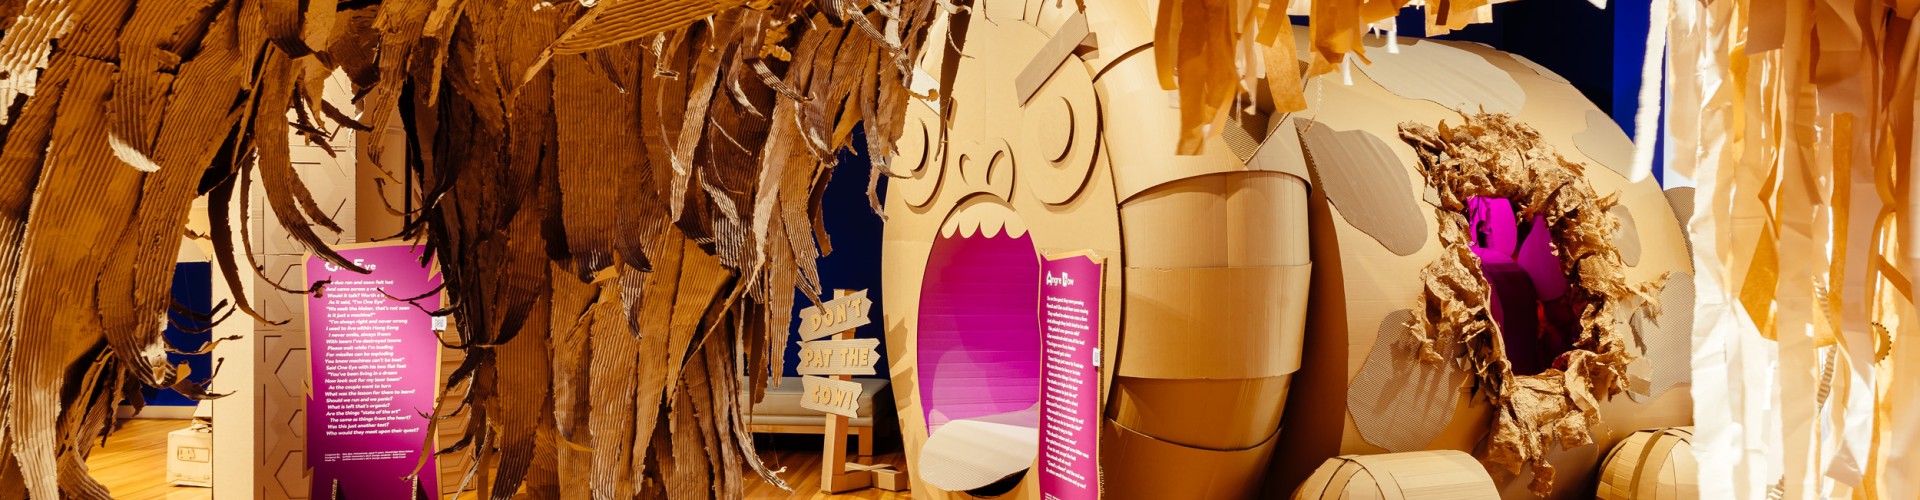 A large cardboard leg from an imaginary beast in the foreground with a cardboard cow in the background who has a very animated face